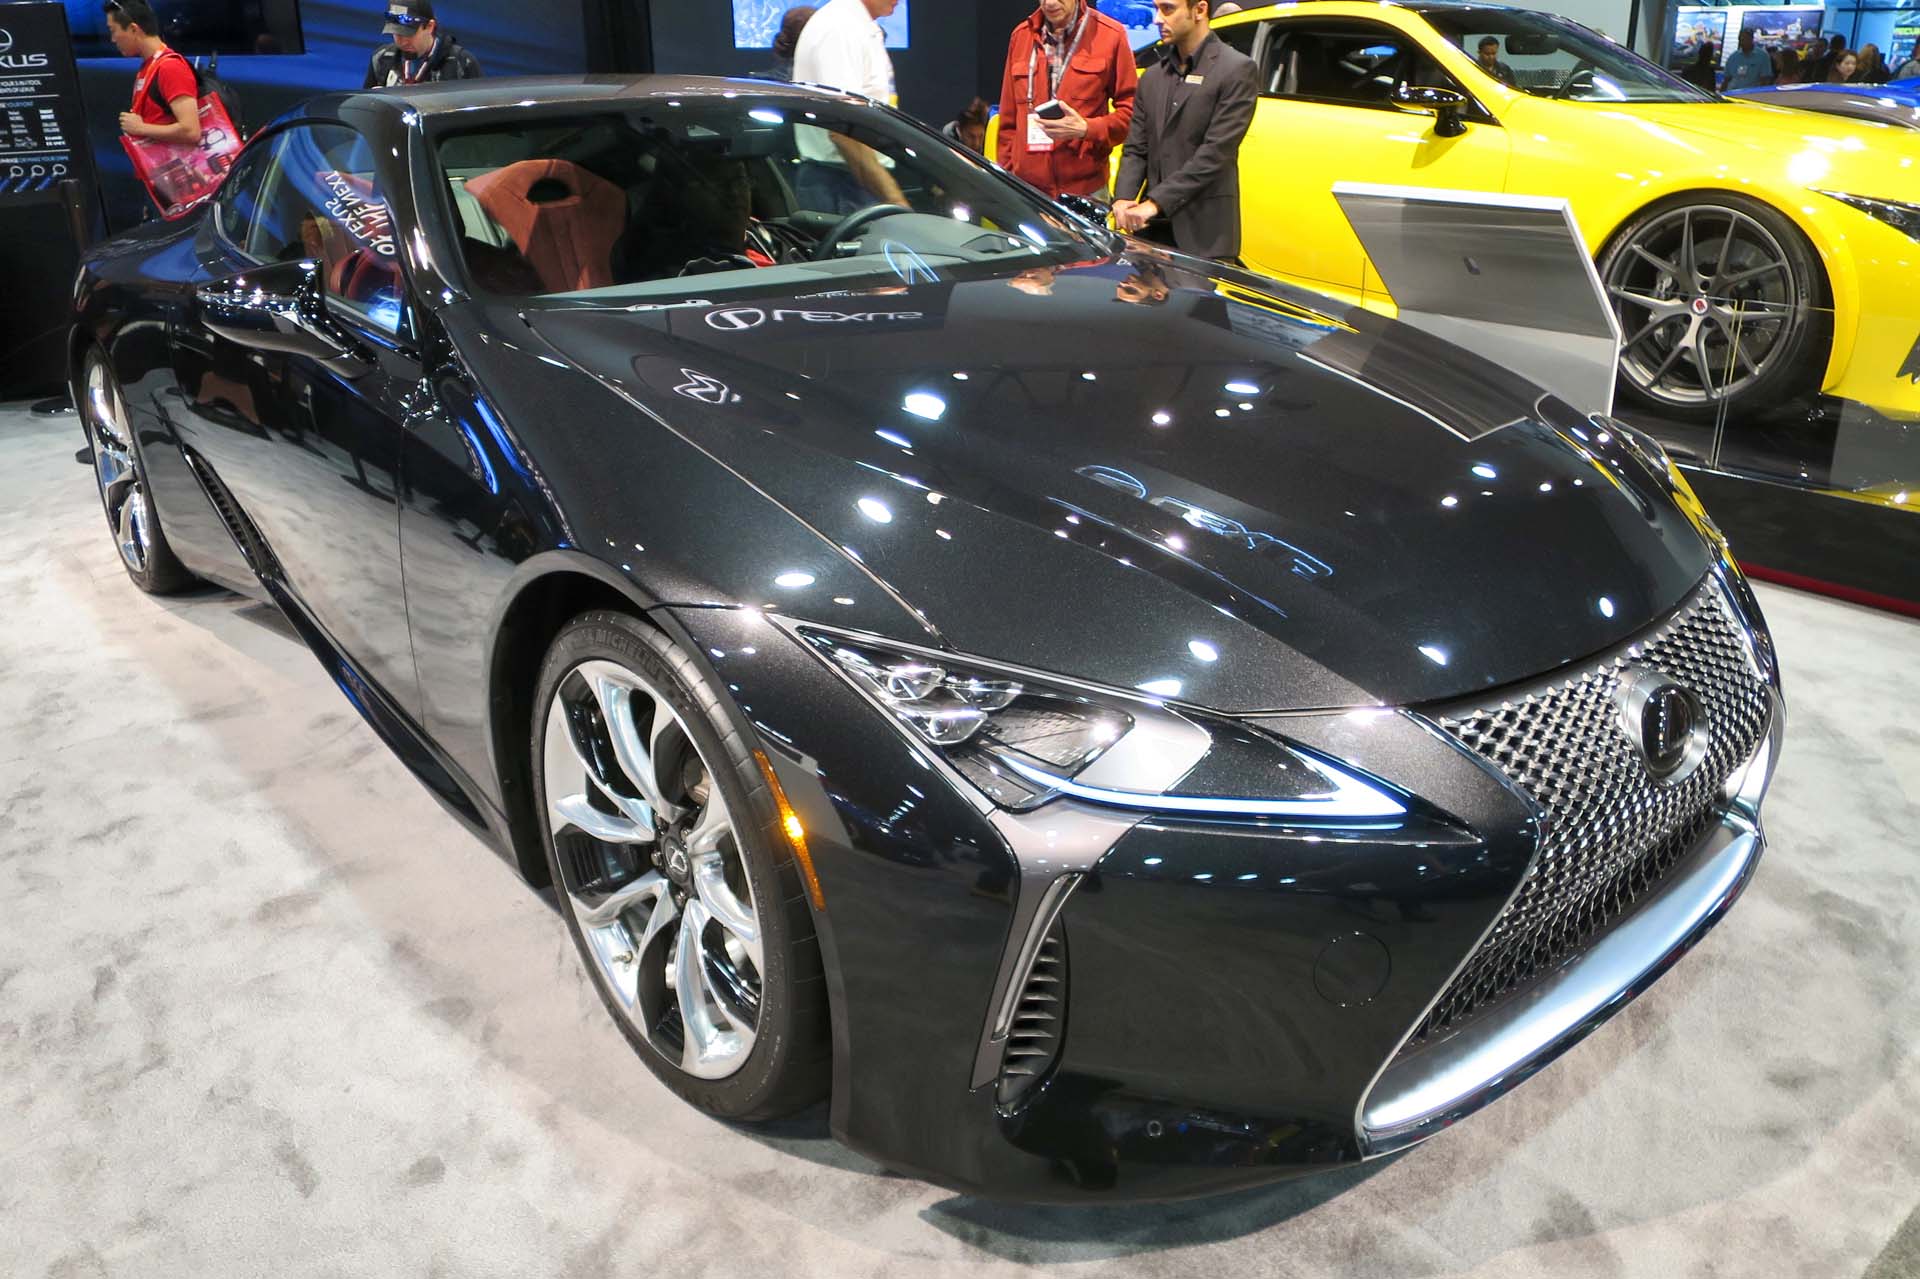 Lexus introduced its new LC 500 at the SEMA show.